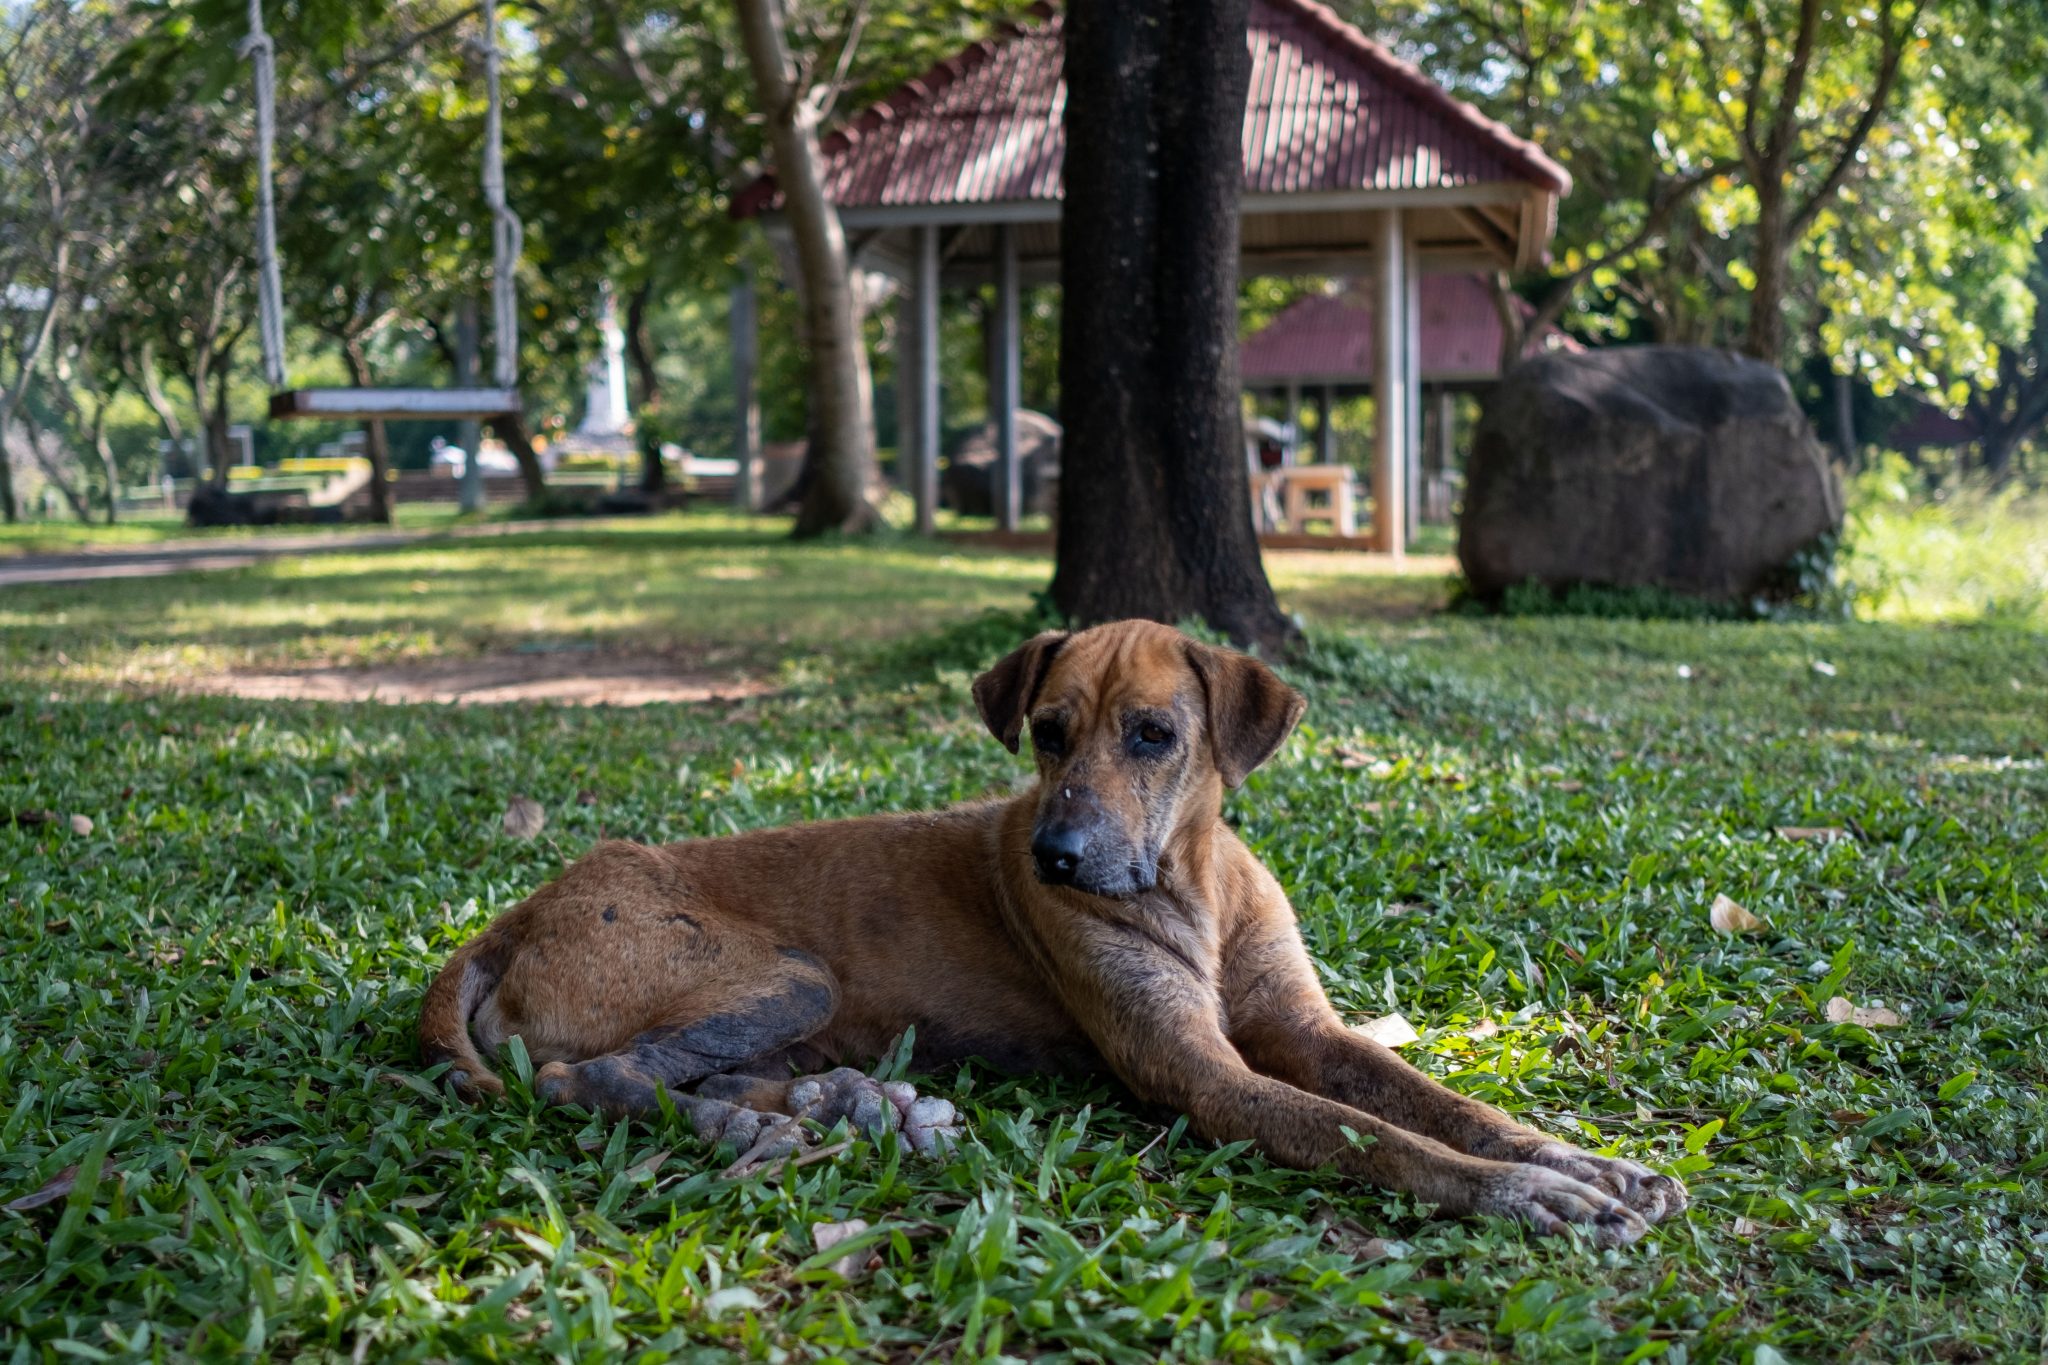 Dog in the Park, Nakhon Ratchasima Province, Thailand